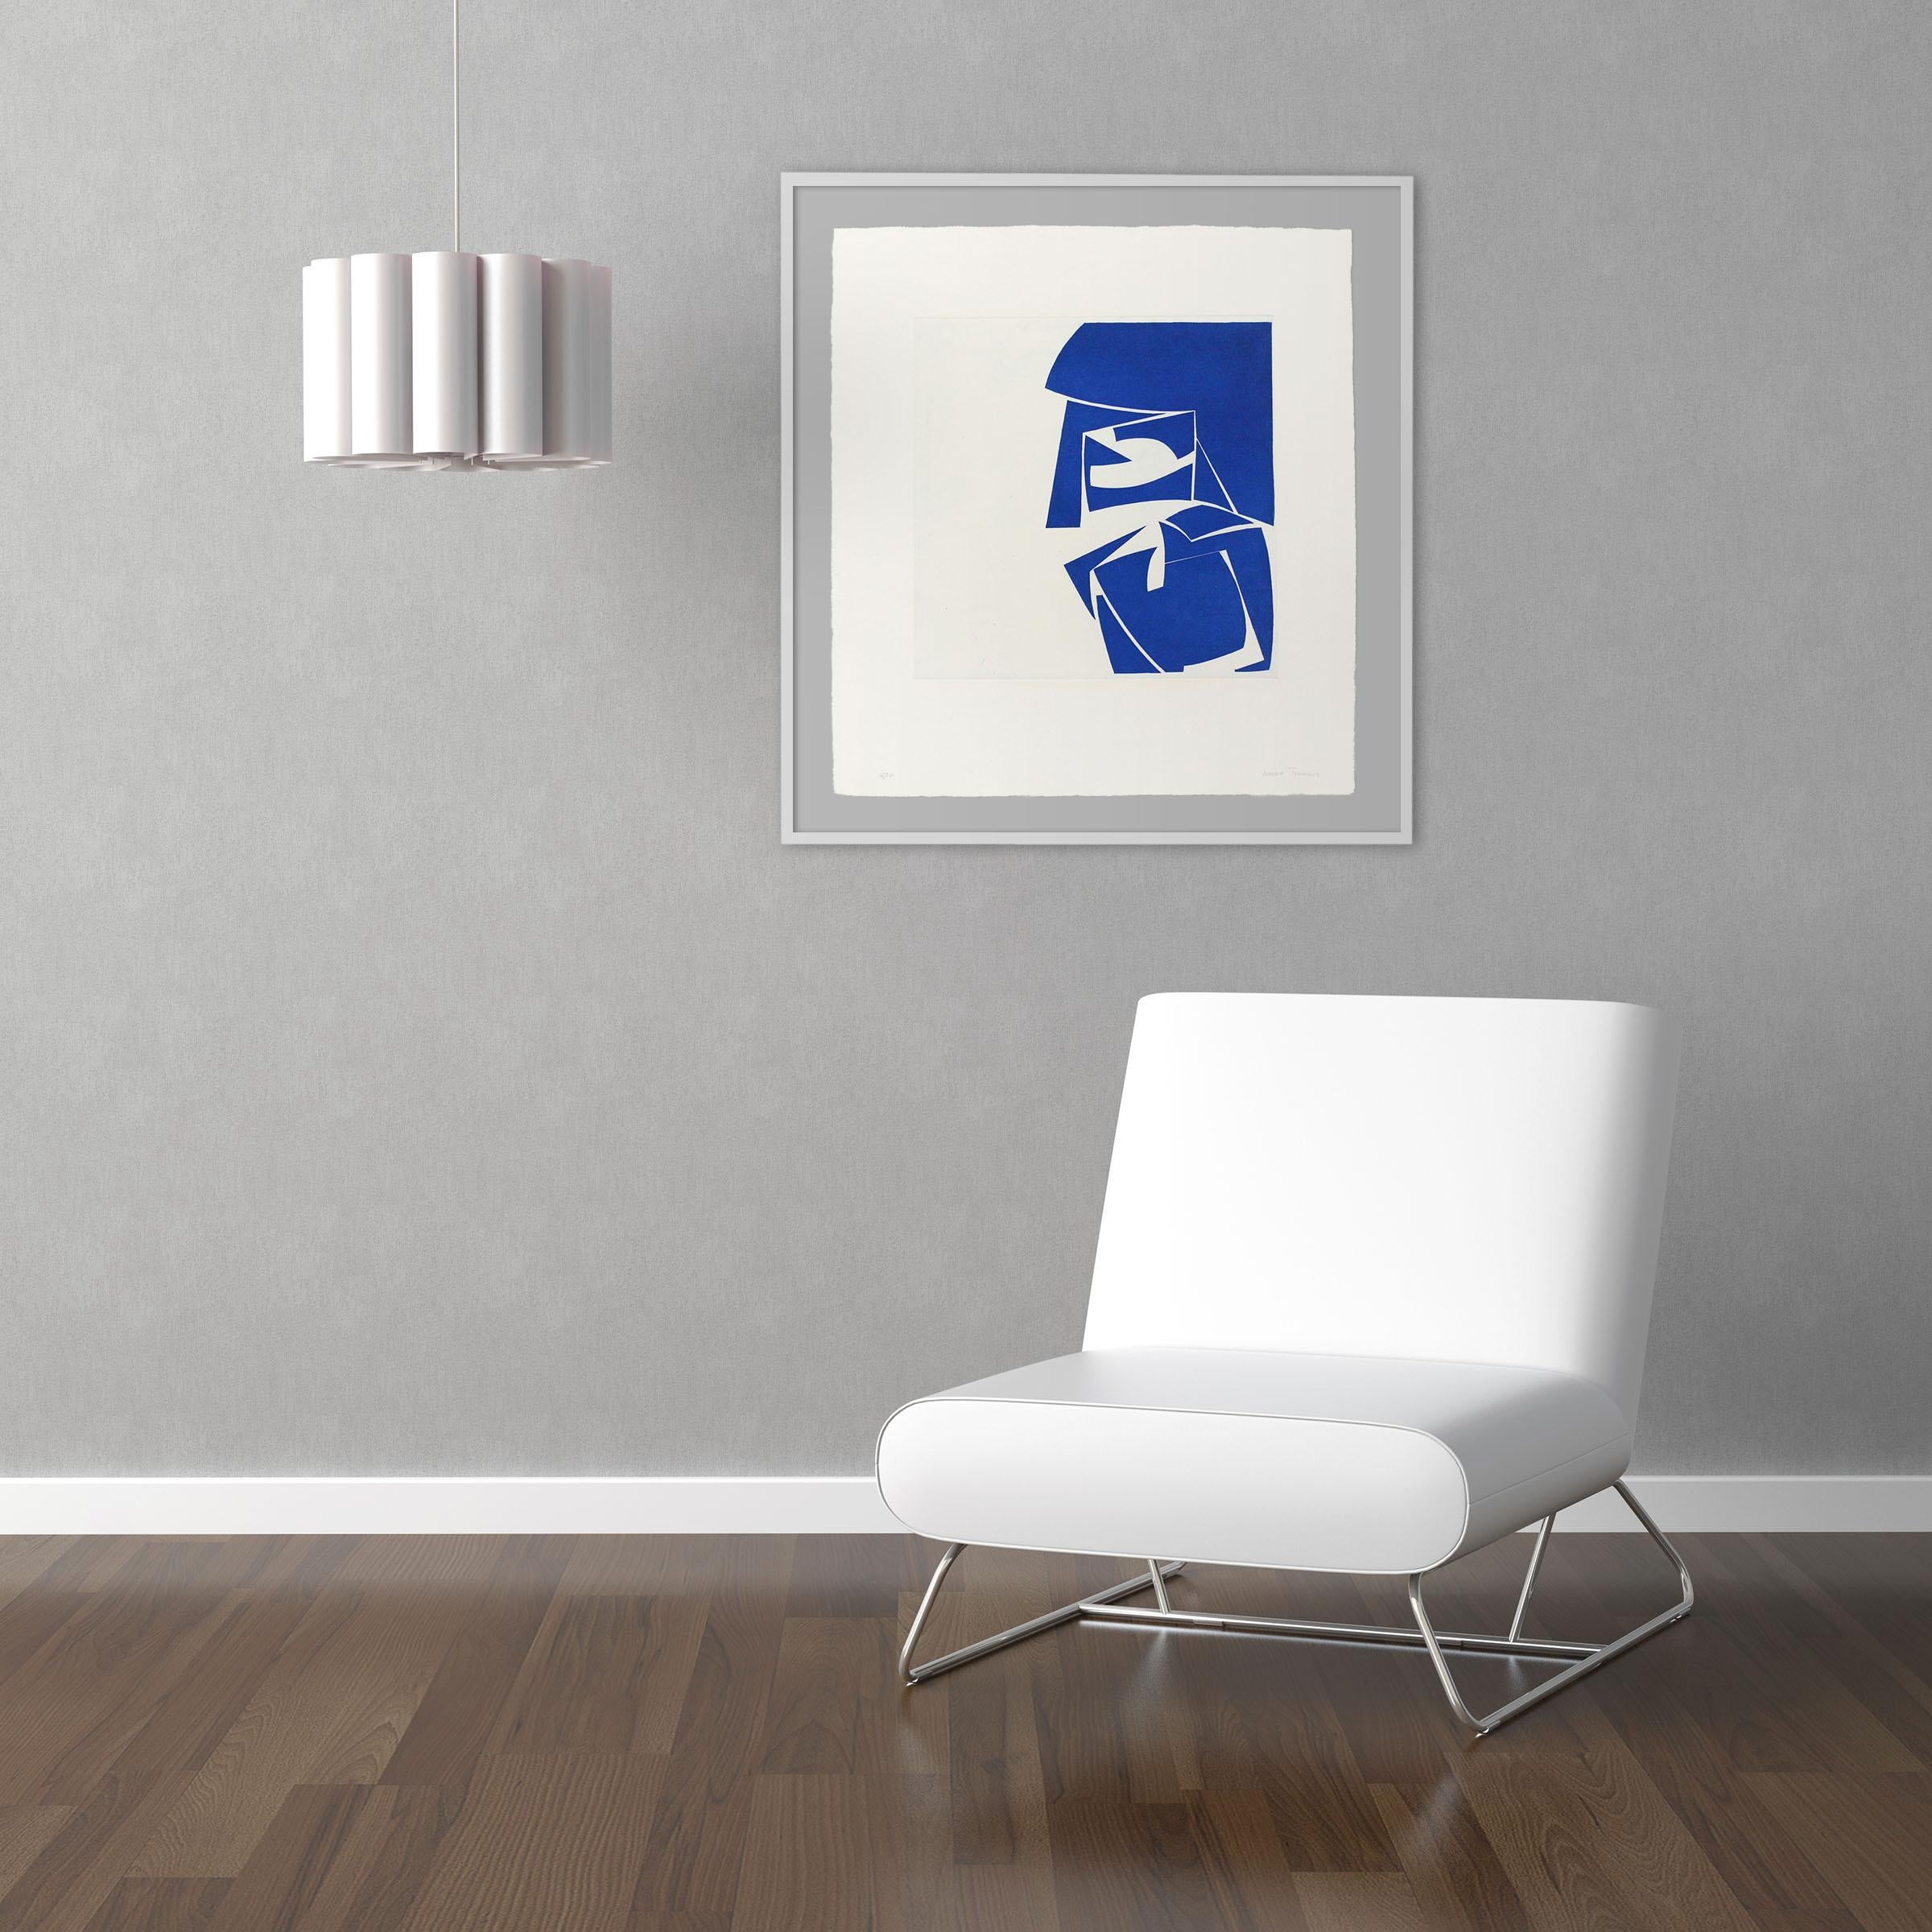 Covers 3 Cobalt (Abstract print) - Print by Joanne Freeman